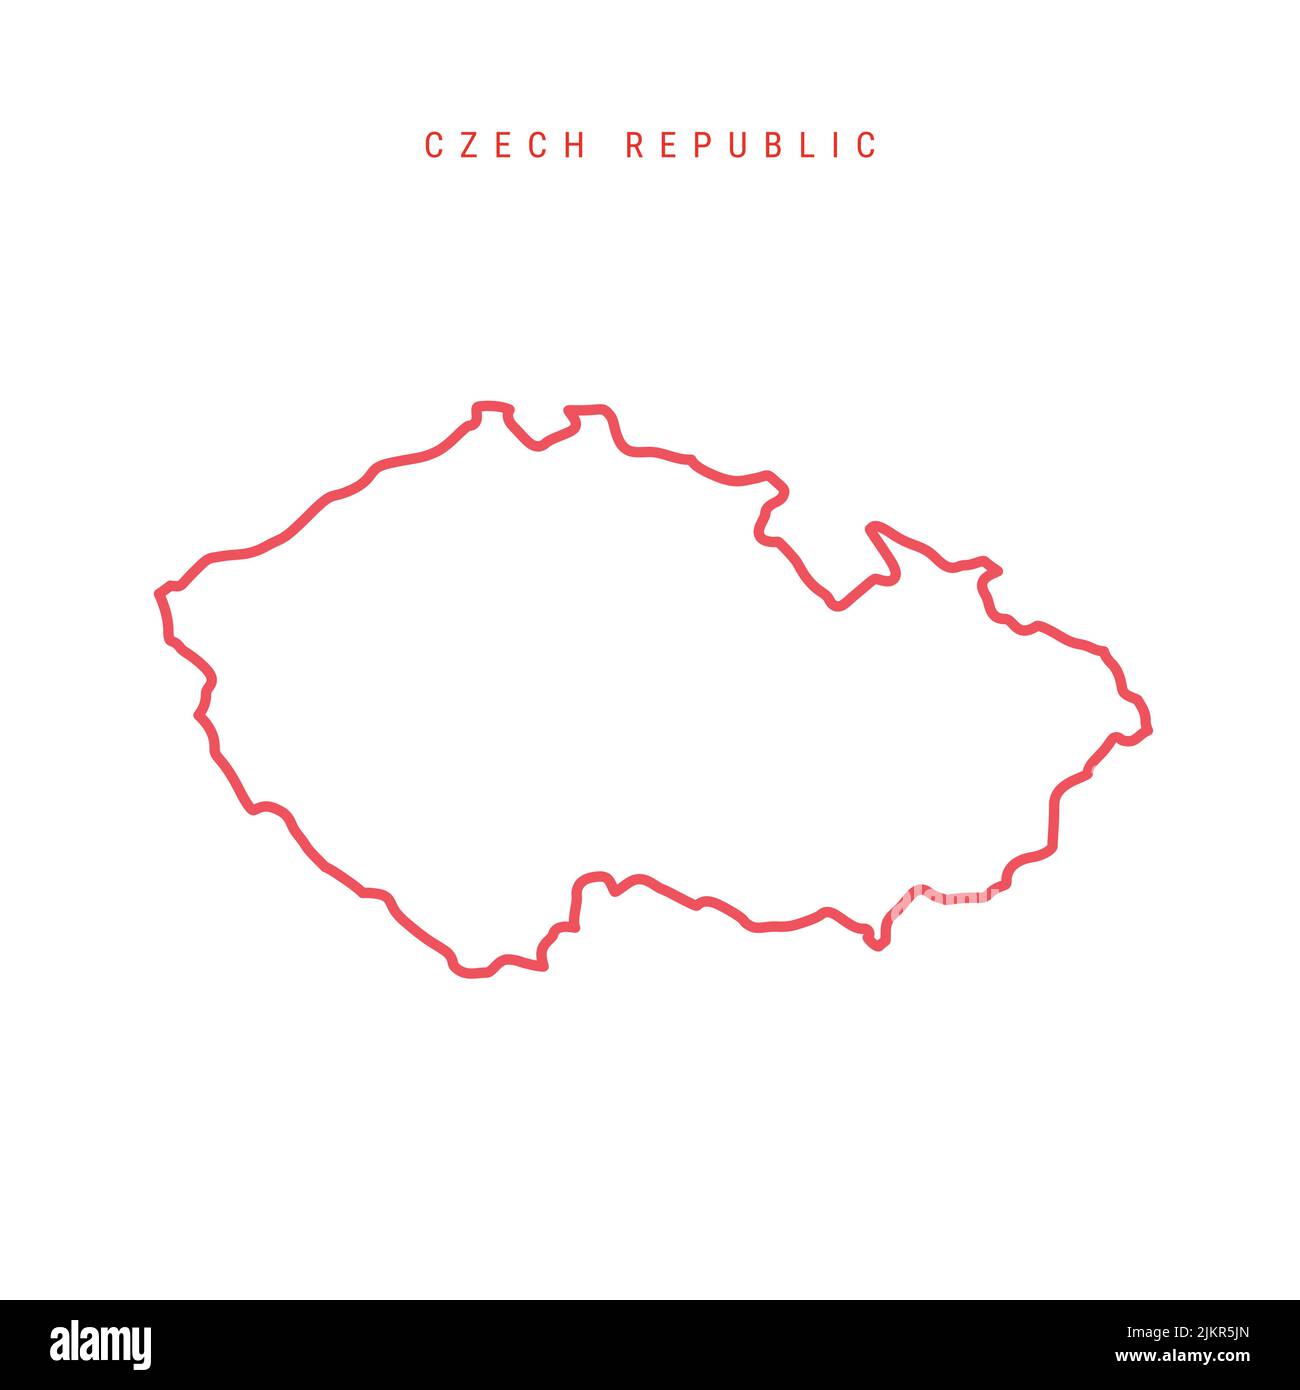 Czech Republic editable outline map. Czechia red border. Country name. Adjust line weight. Change to any color. Vector illustration. Stock Vector